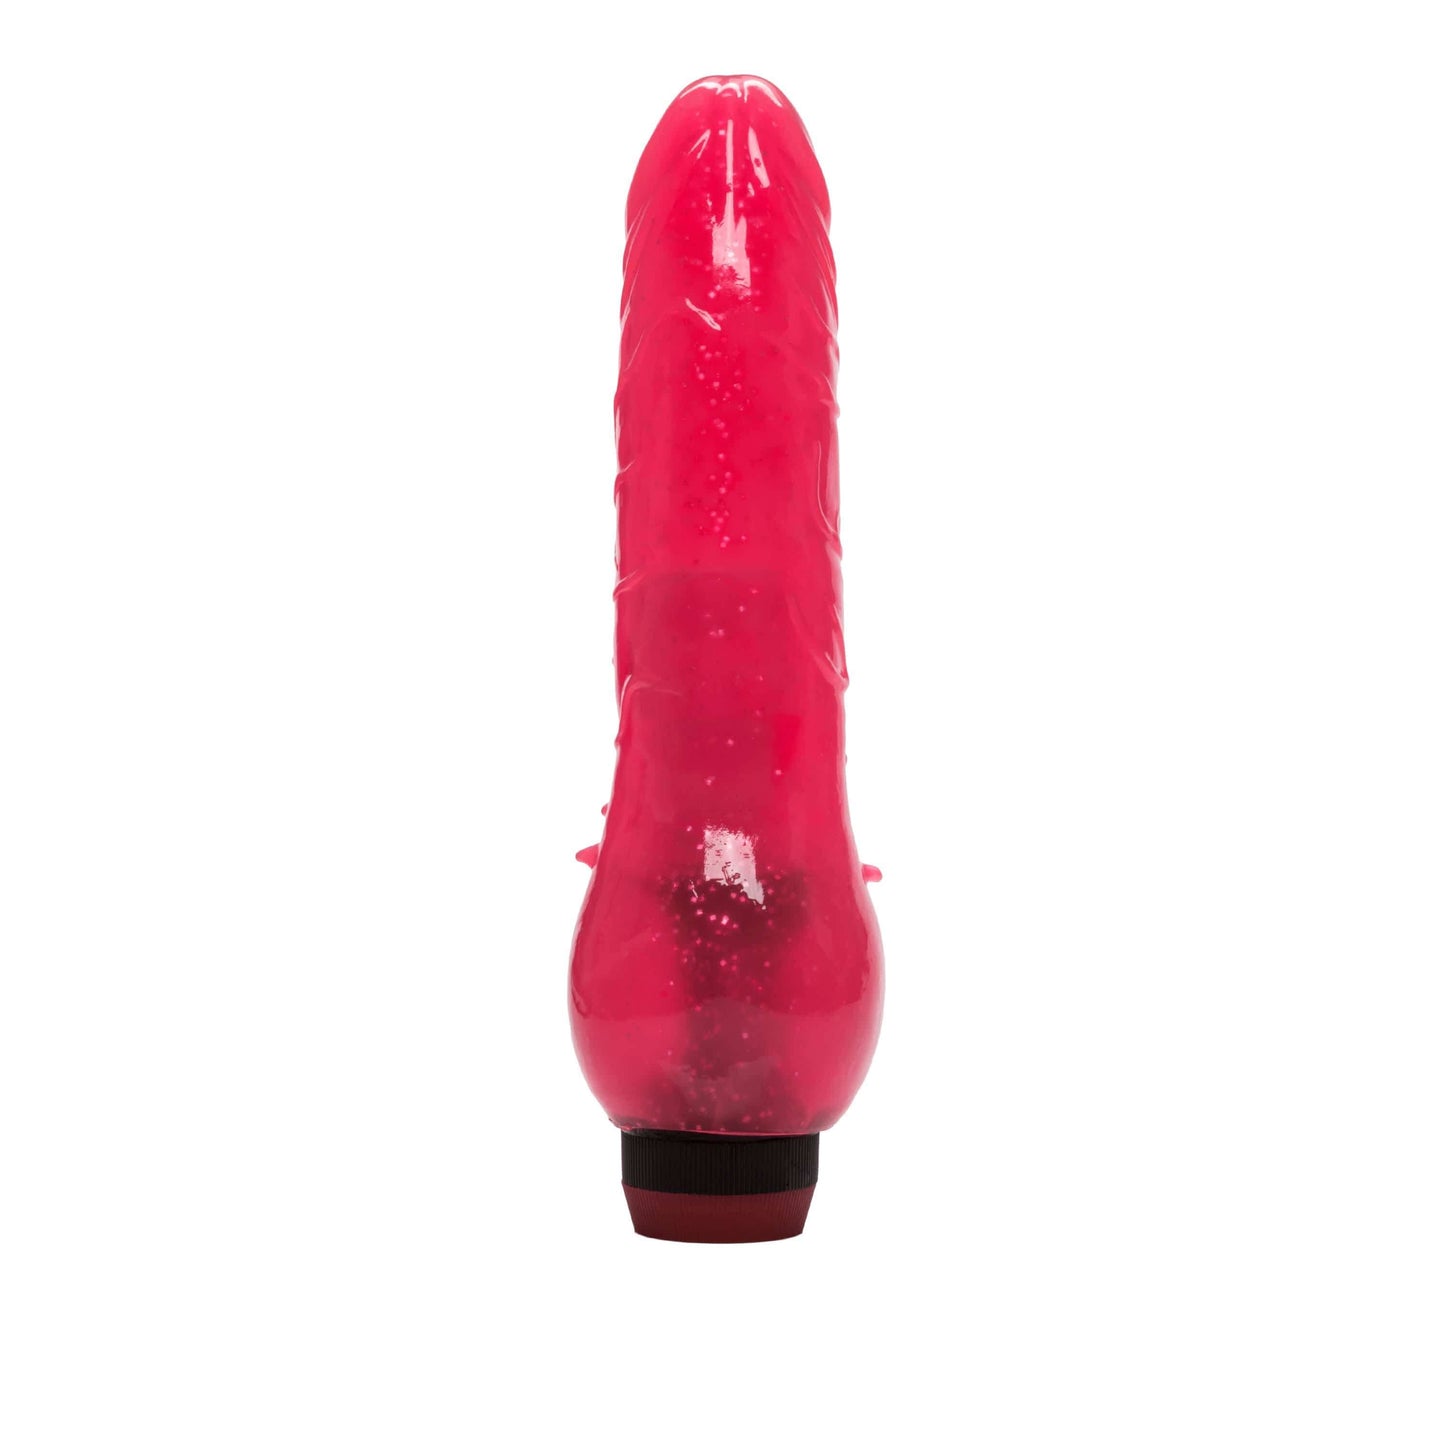 Clitterific 8" Dong - Hot Pink - Thorn & Feather Sex Toy Canada